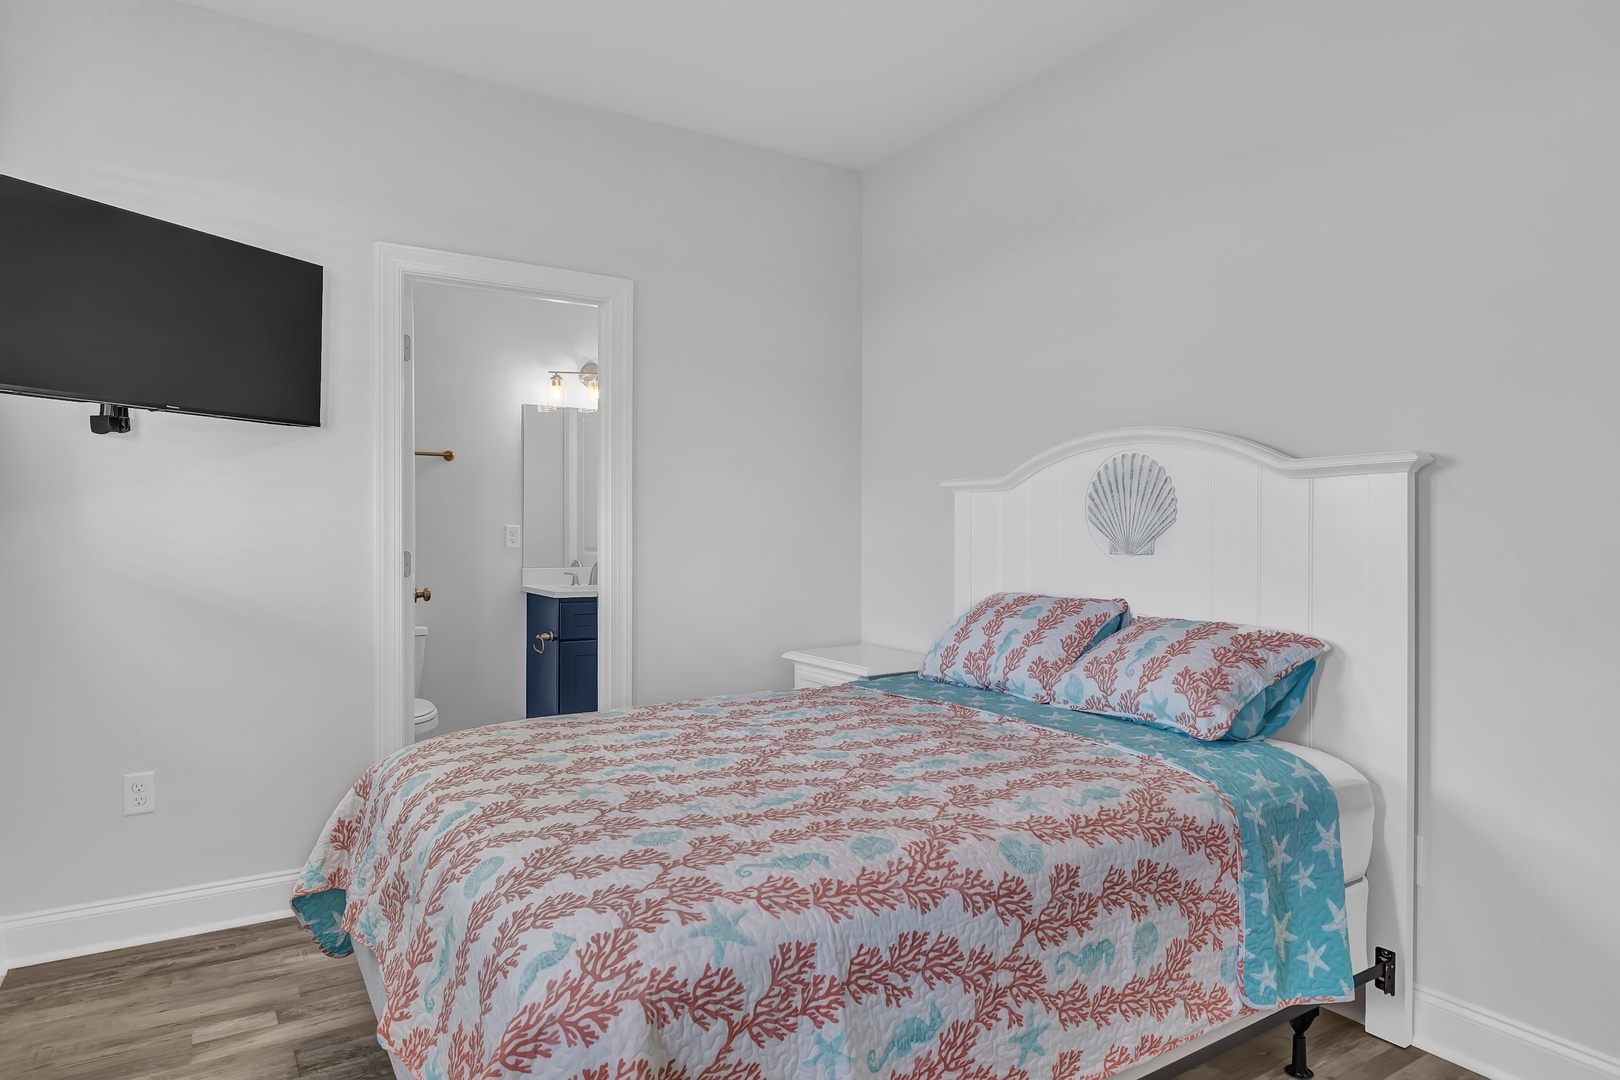 Top floor guest bedroom with a queen-sized bed, a Smart TV, balcony access, and an ensuite bathroom.